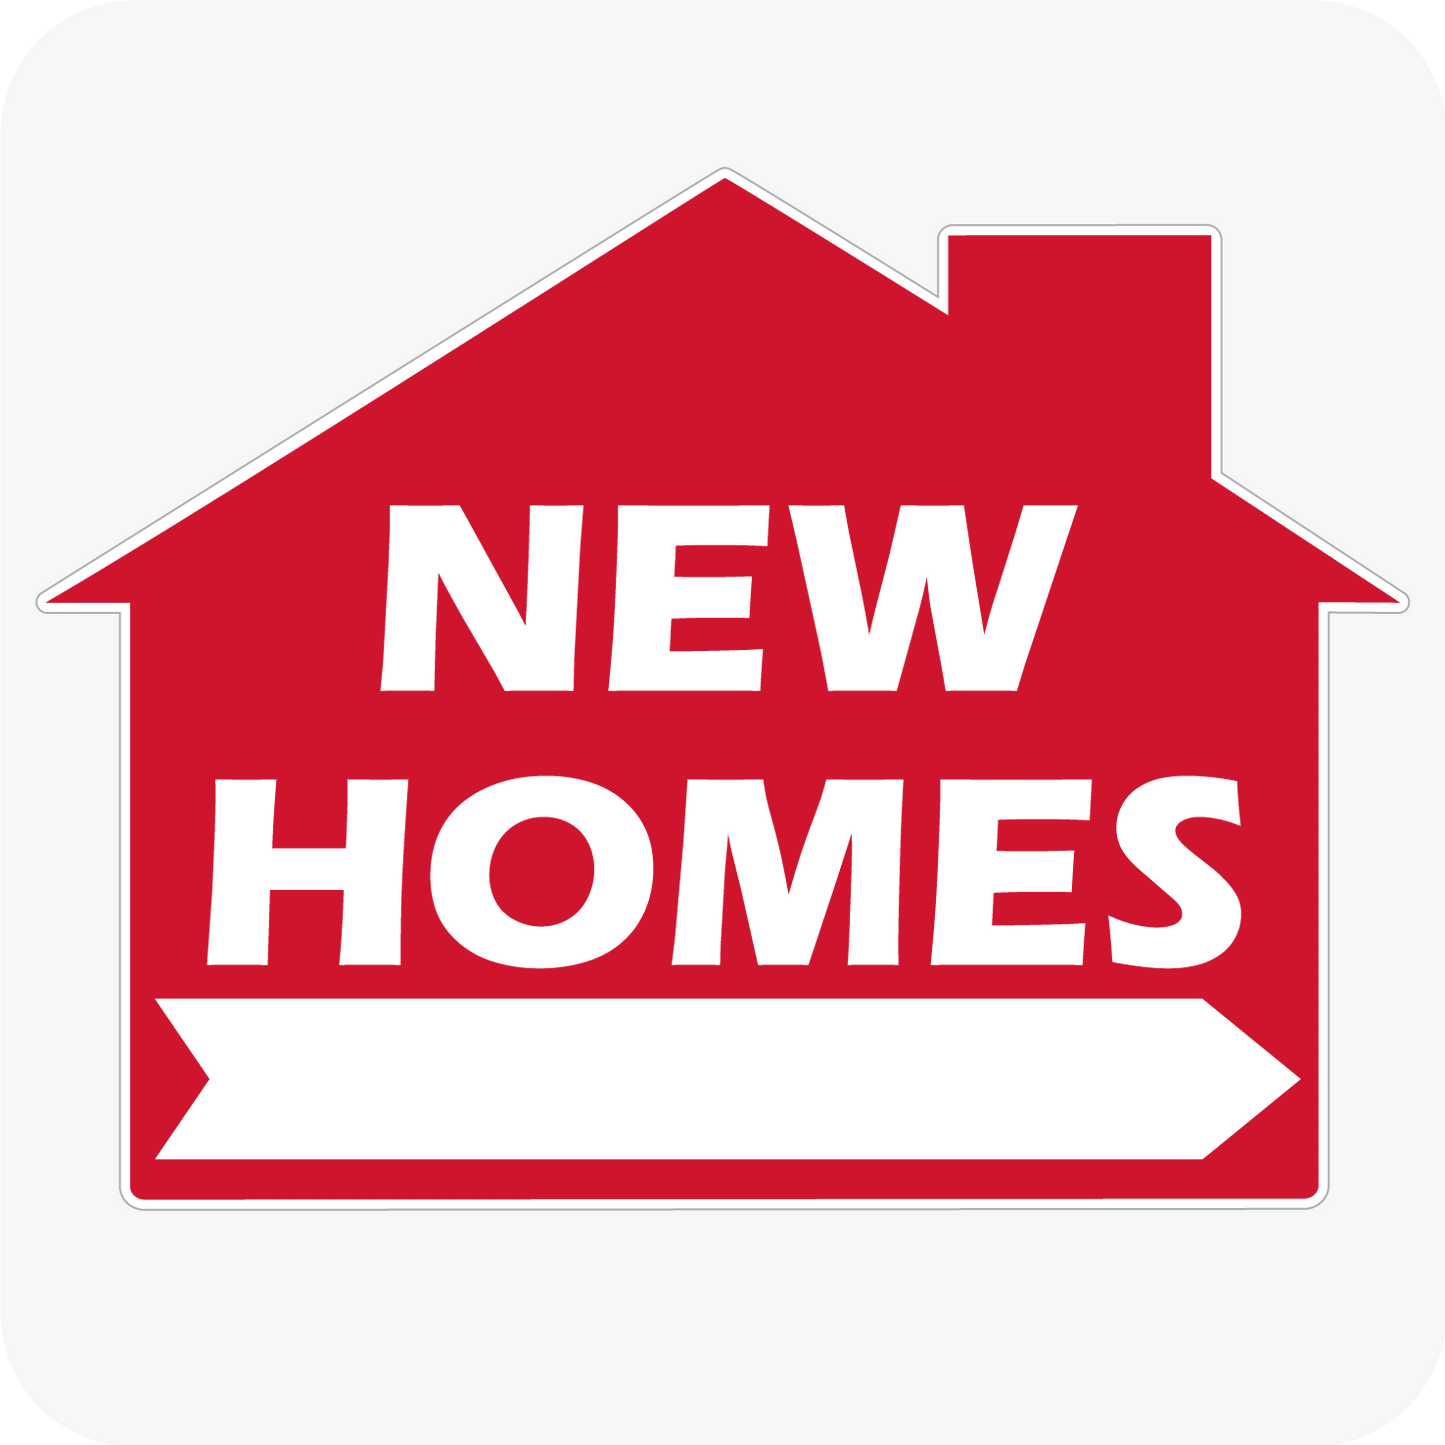 New Homes - House Shaped Sign 18 x 24 - Red